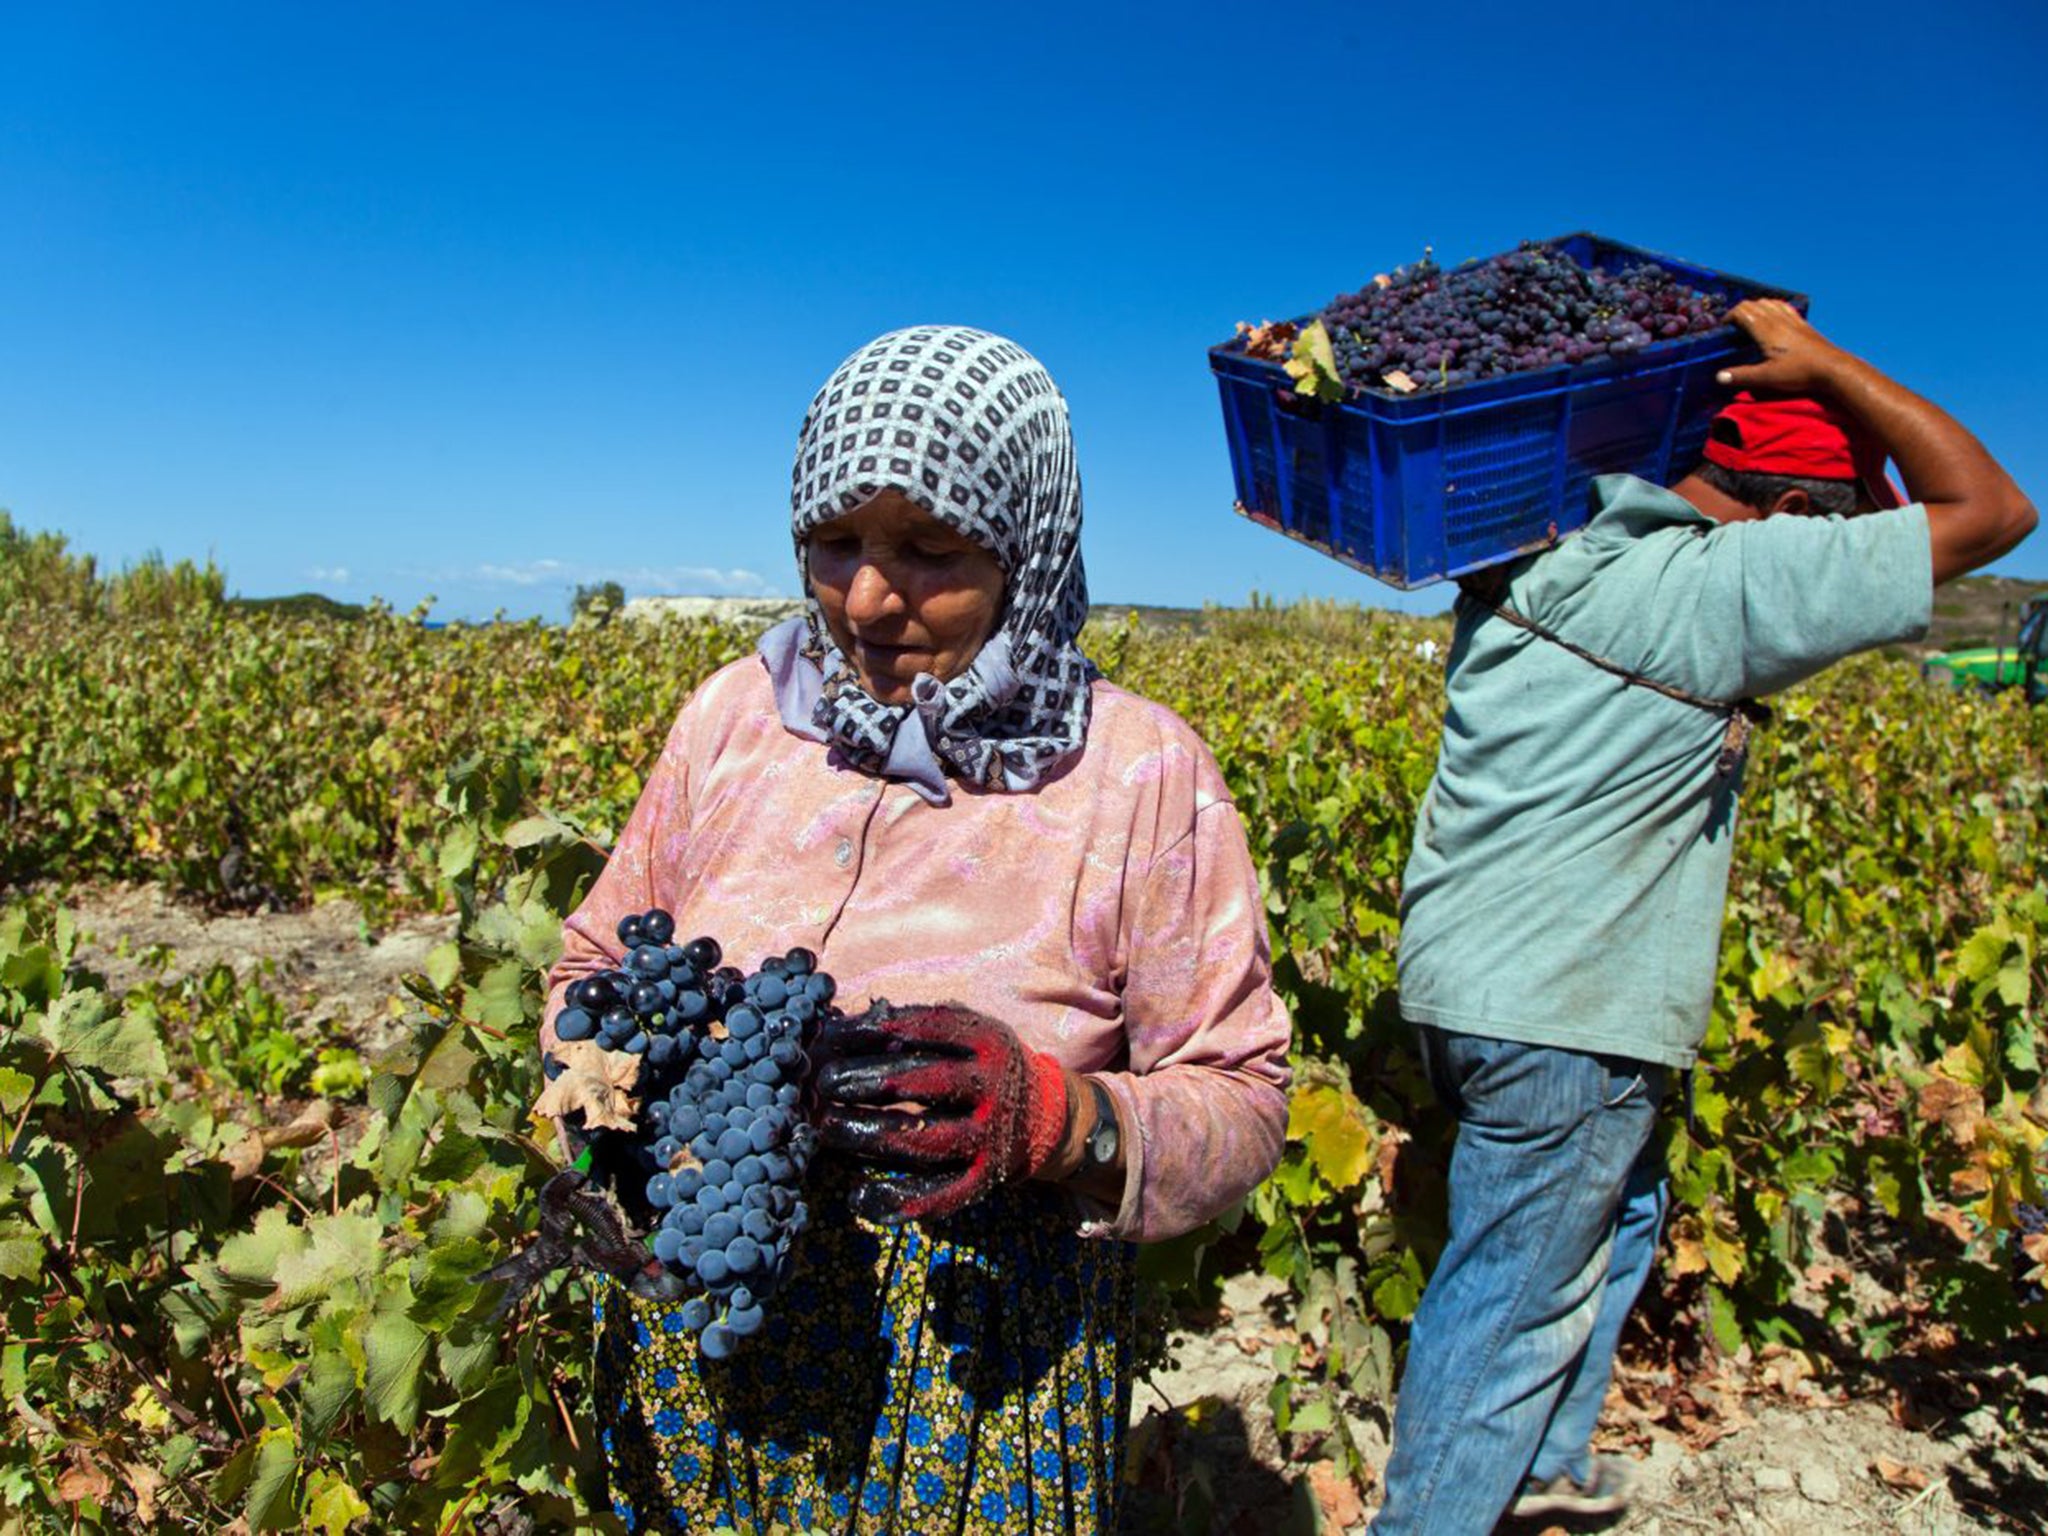 Workers collecting the grape harvest at a vineyard on the Turkish island of Bozcaada, which has an ancient tradition of winemaking